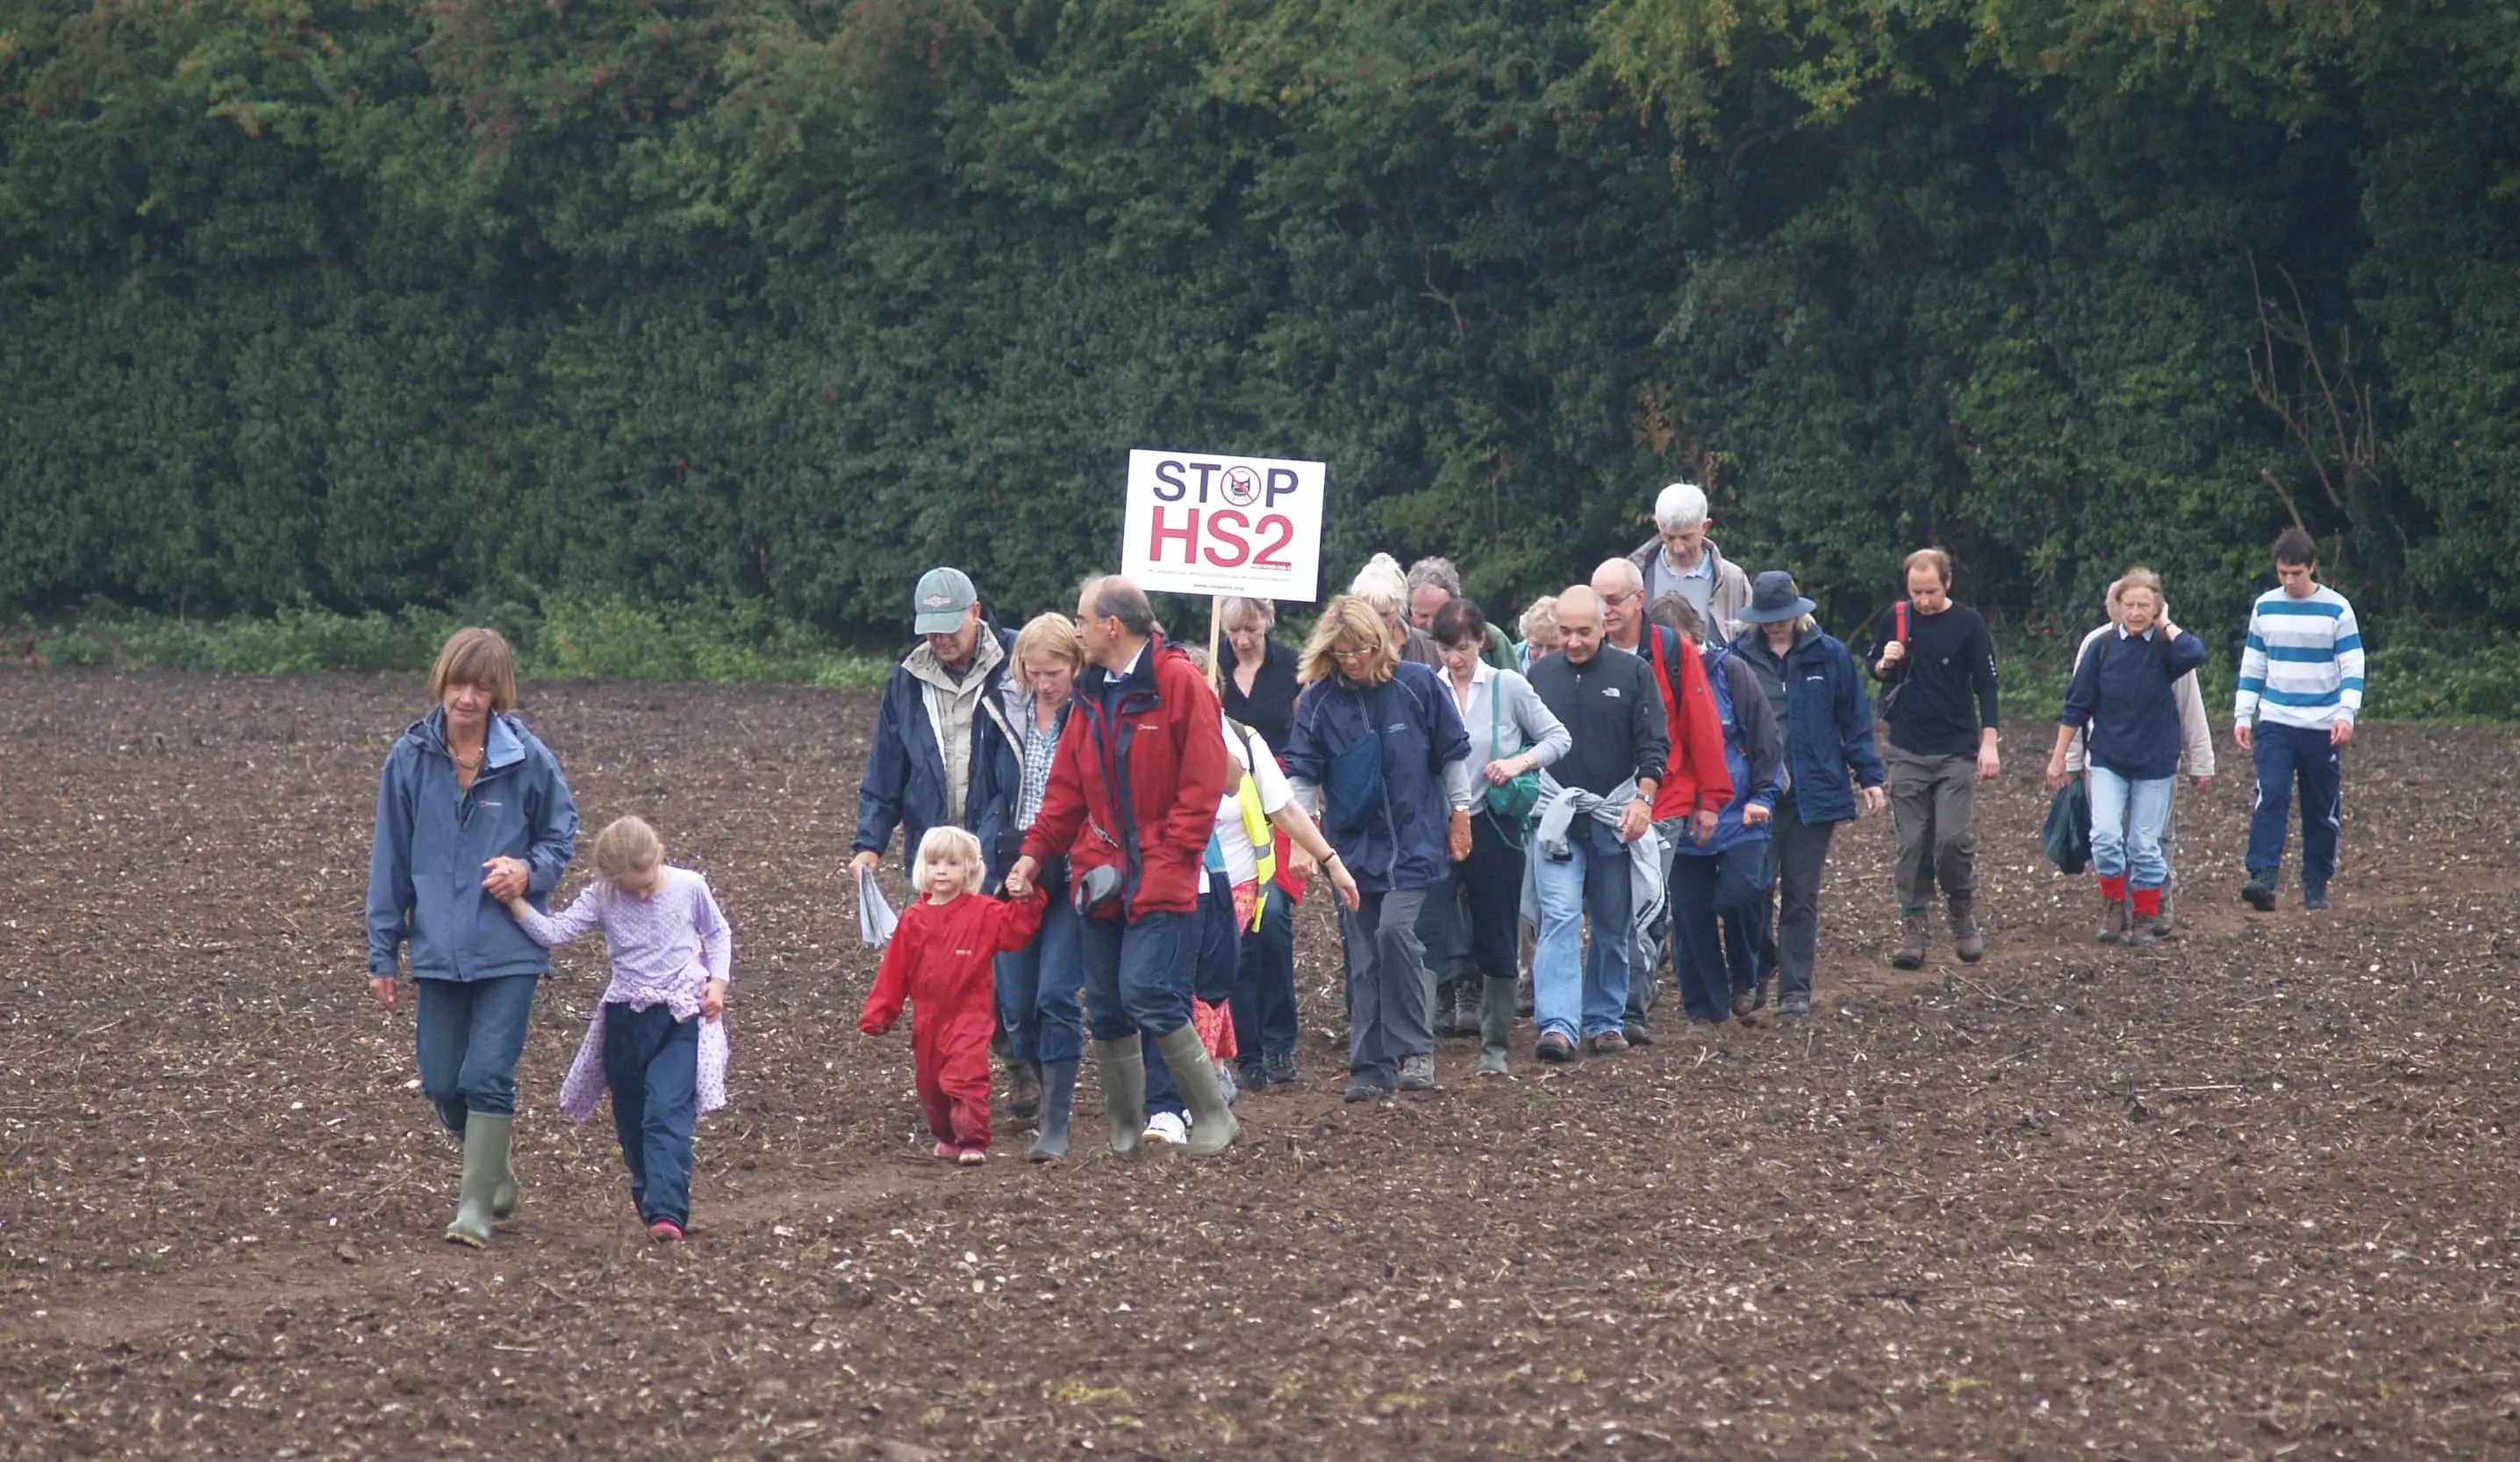 protest against HS2 - group of people walking across a field